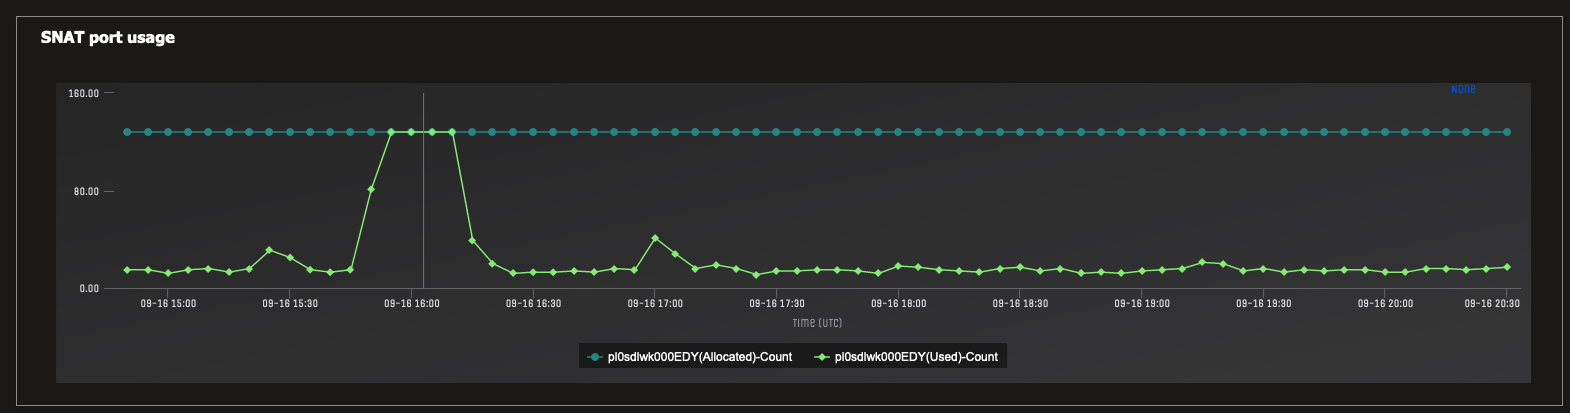 SNAT Port Exhastion graph shows a point during a load test when the App Service ran out of ports